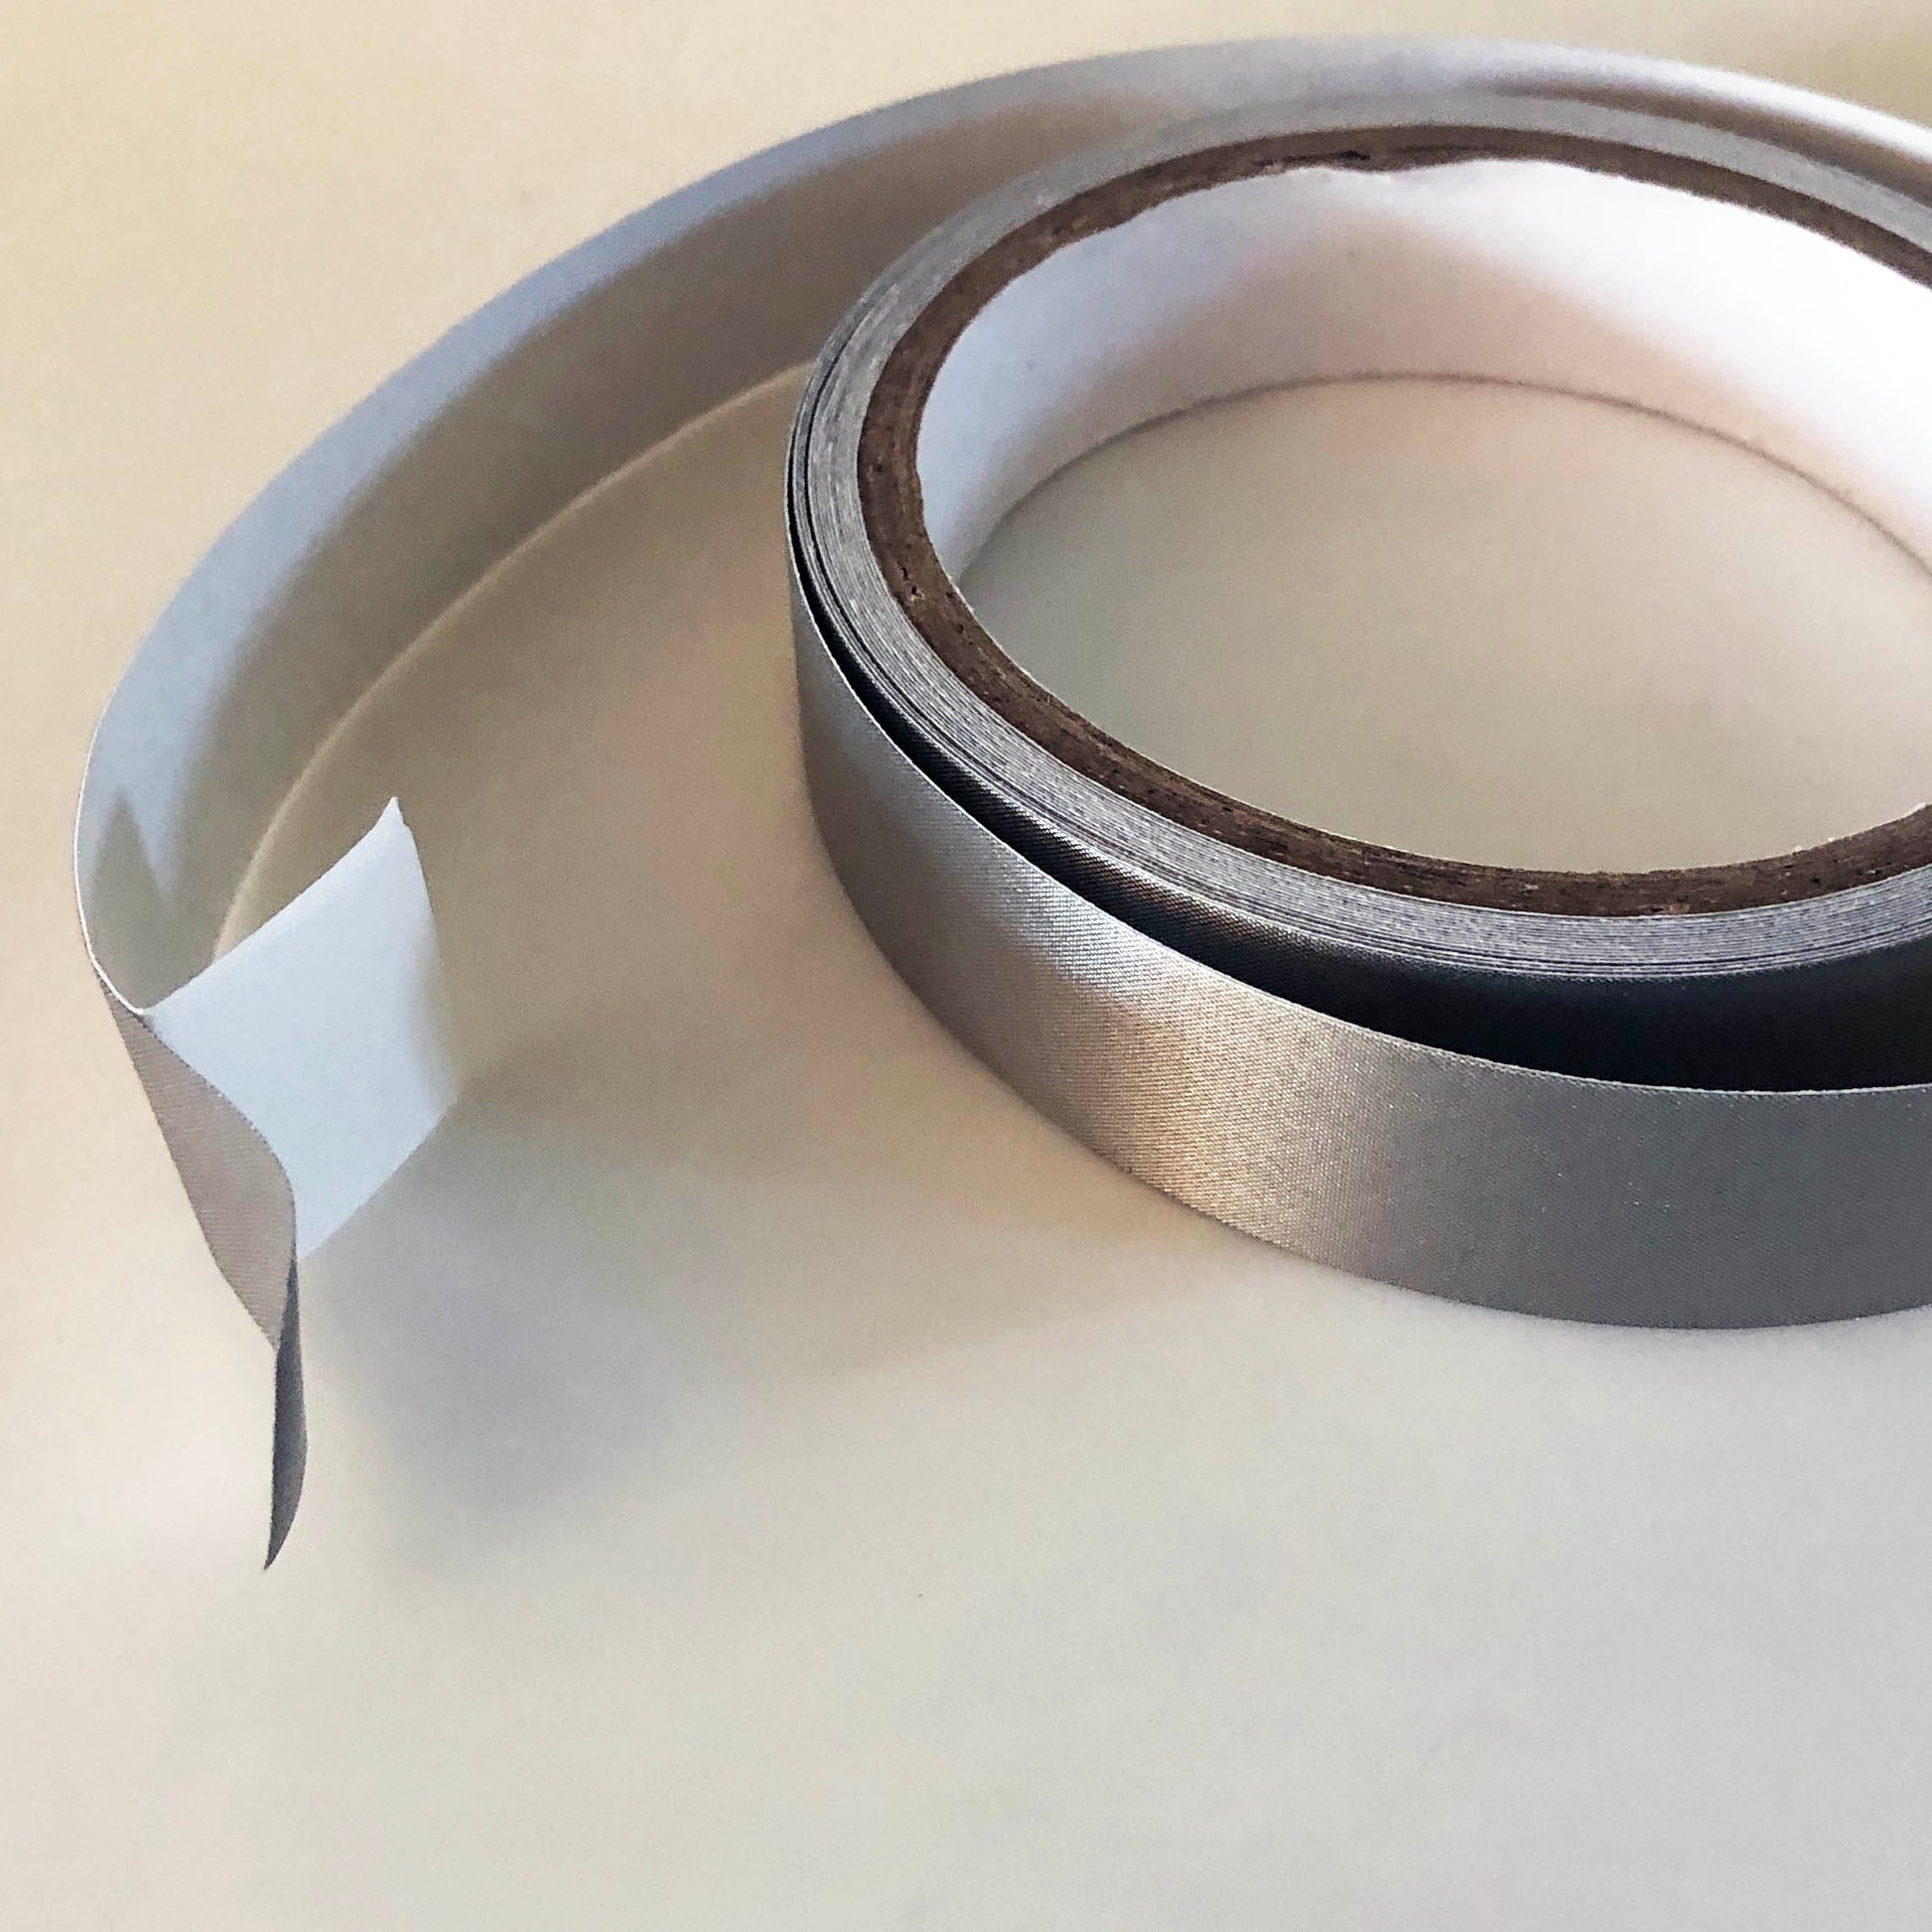 A 5 meter roll of conductive tape with an inch of the silver conductive tape separated from the white backing